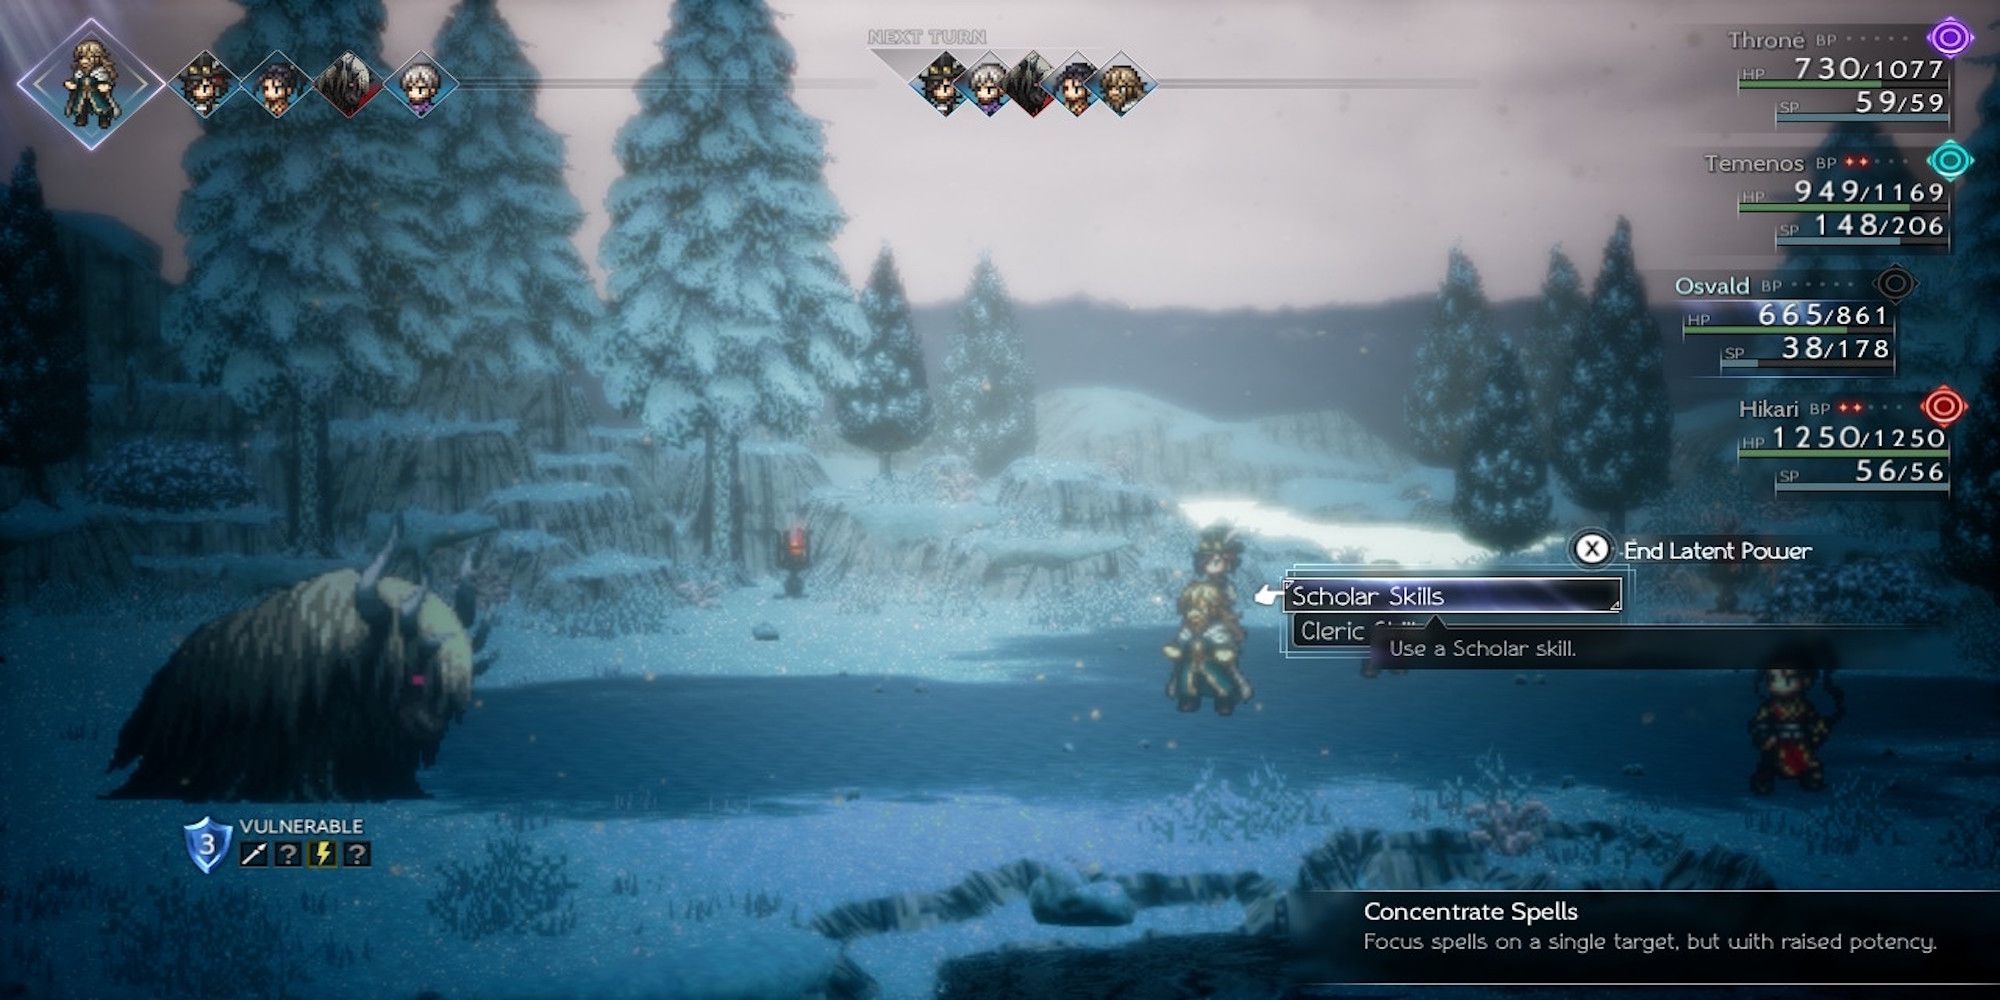 Osvald activating their Latent Power in battle in Octopath Traveler 2